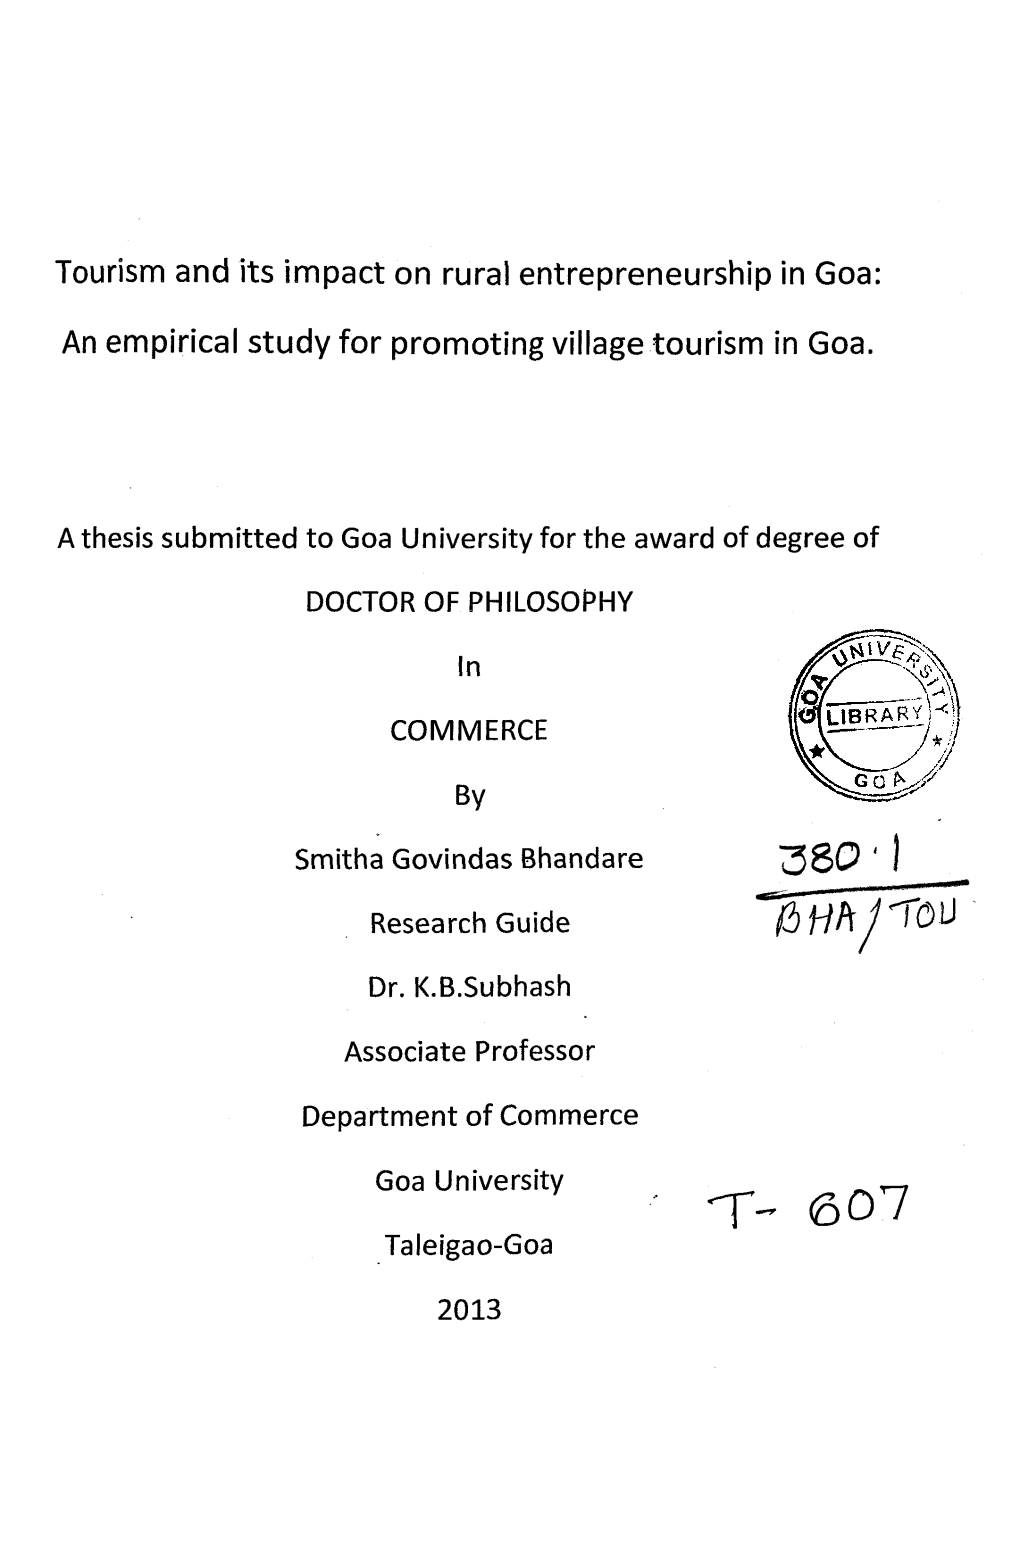 A Thesis Submitted to Goa University for the Award of Degree of DOCTOR